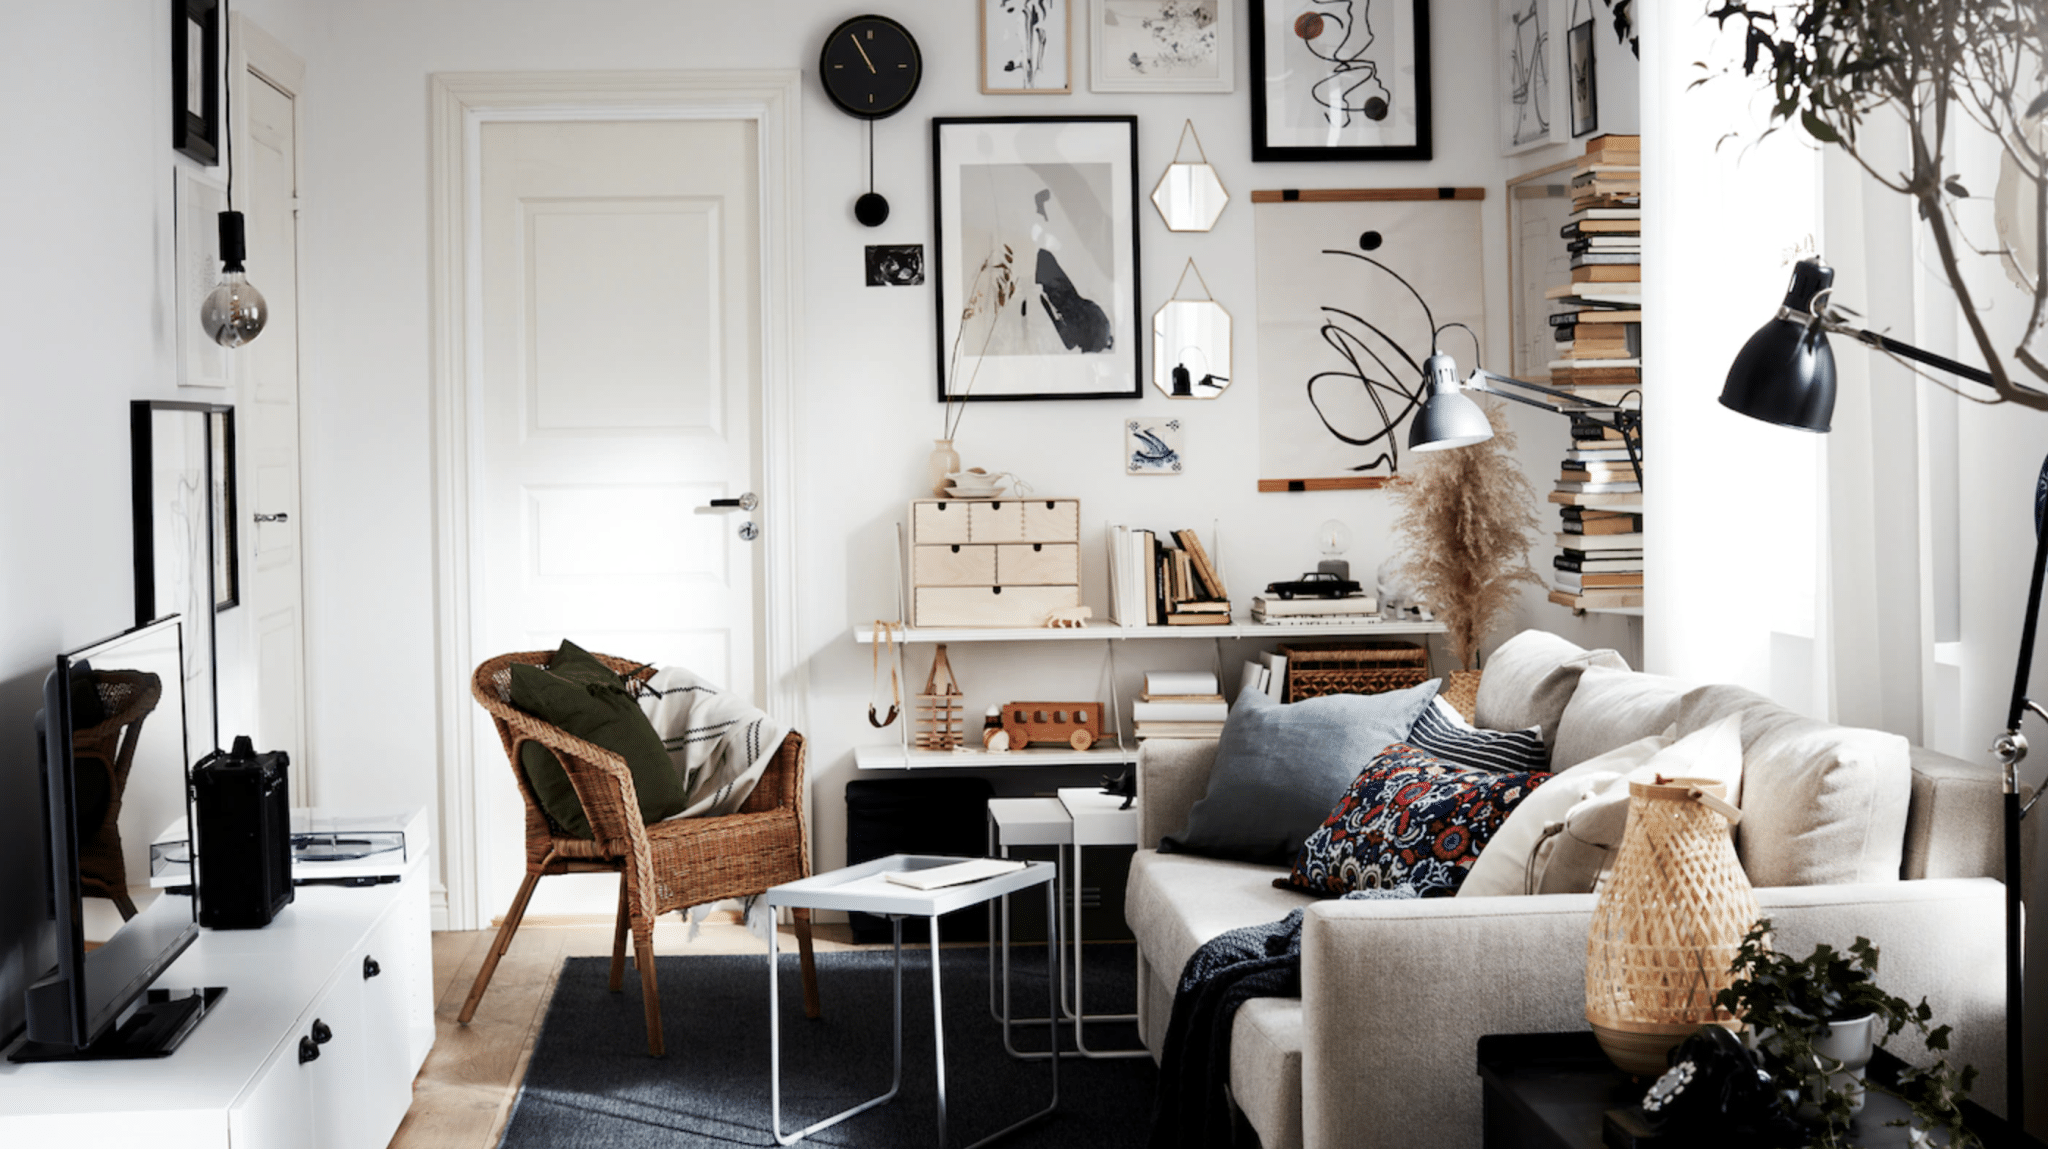 How to Decorate a Small Apartment Living Room